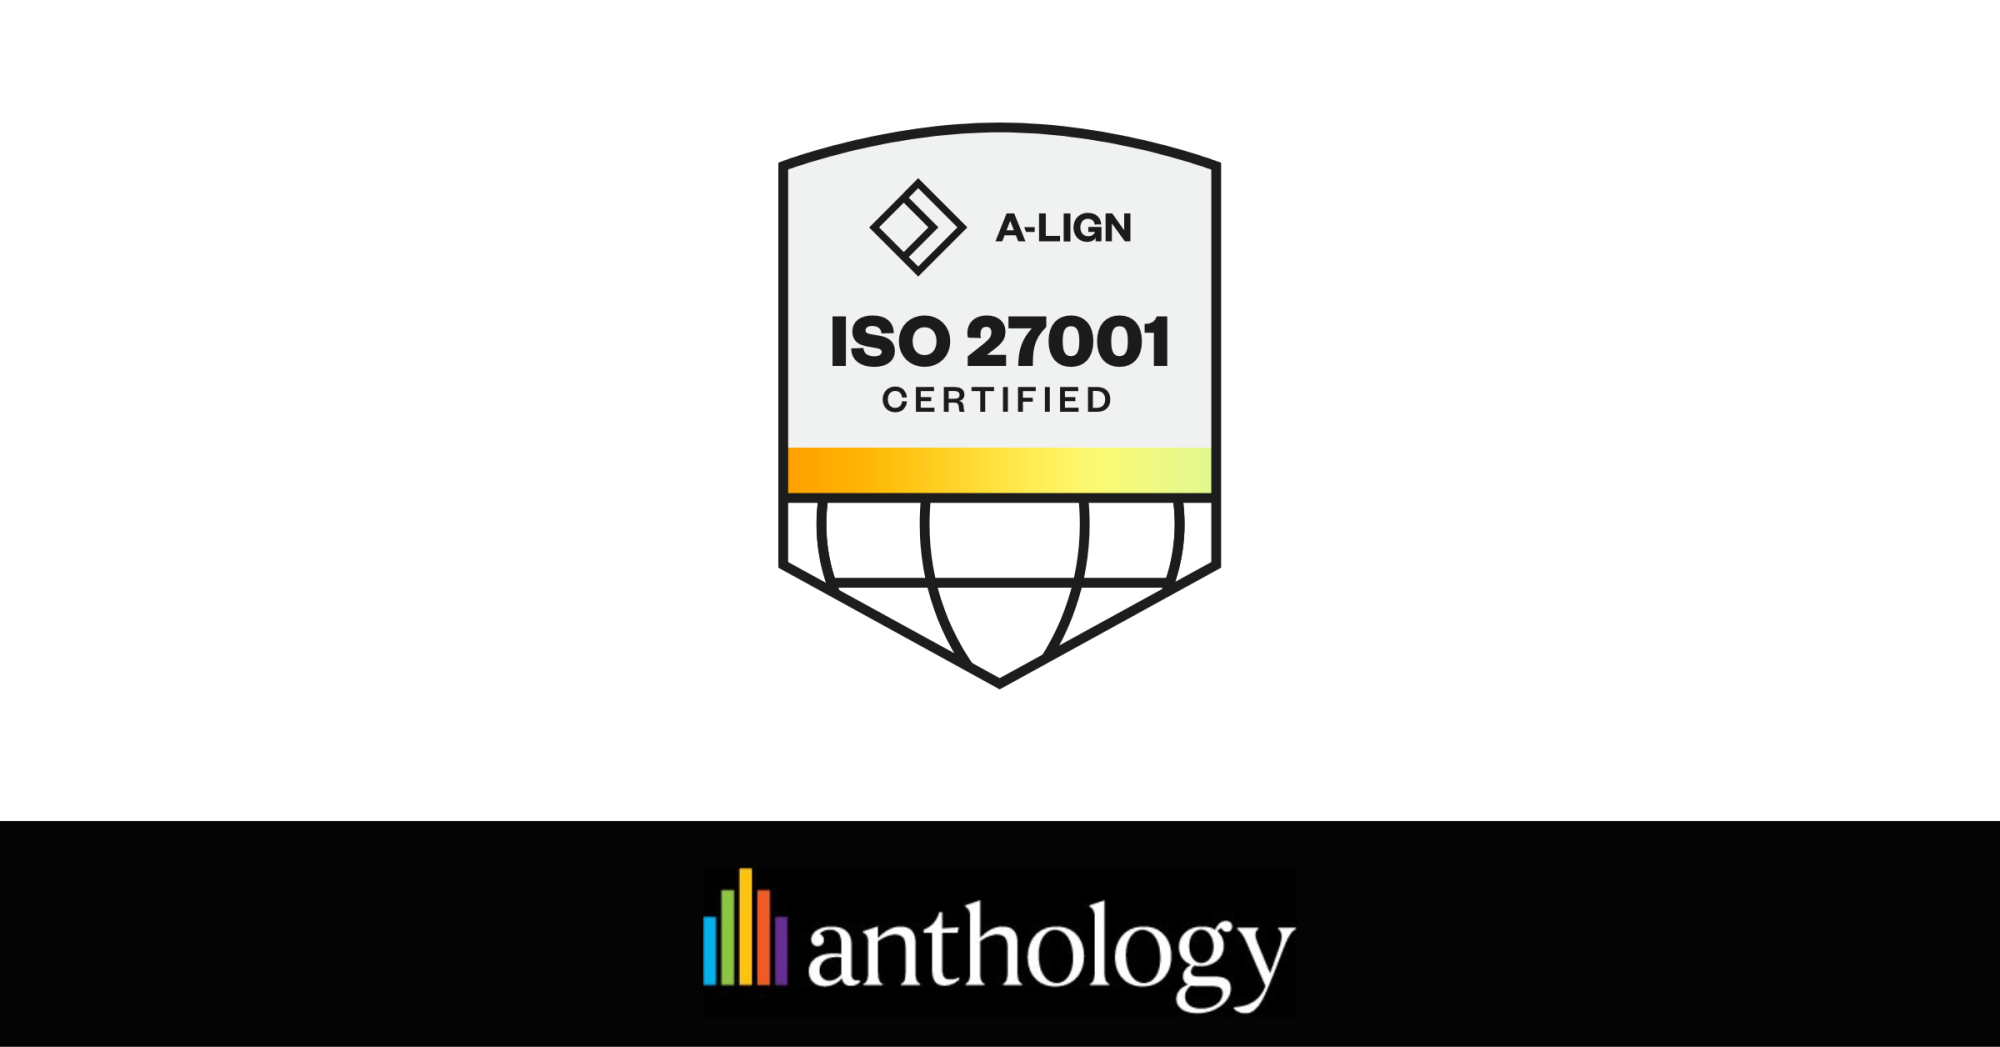 A-LIGN ISO 27001 Certified logo over the Anthology logo